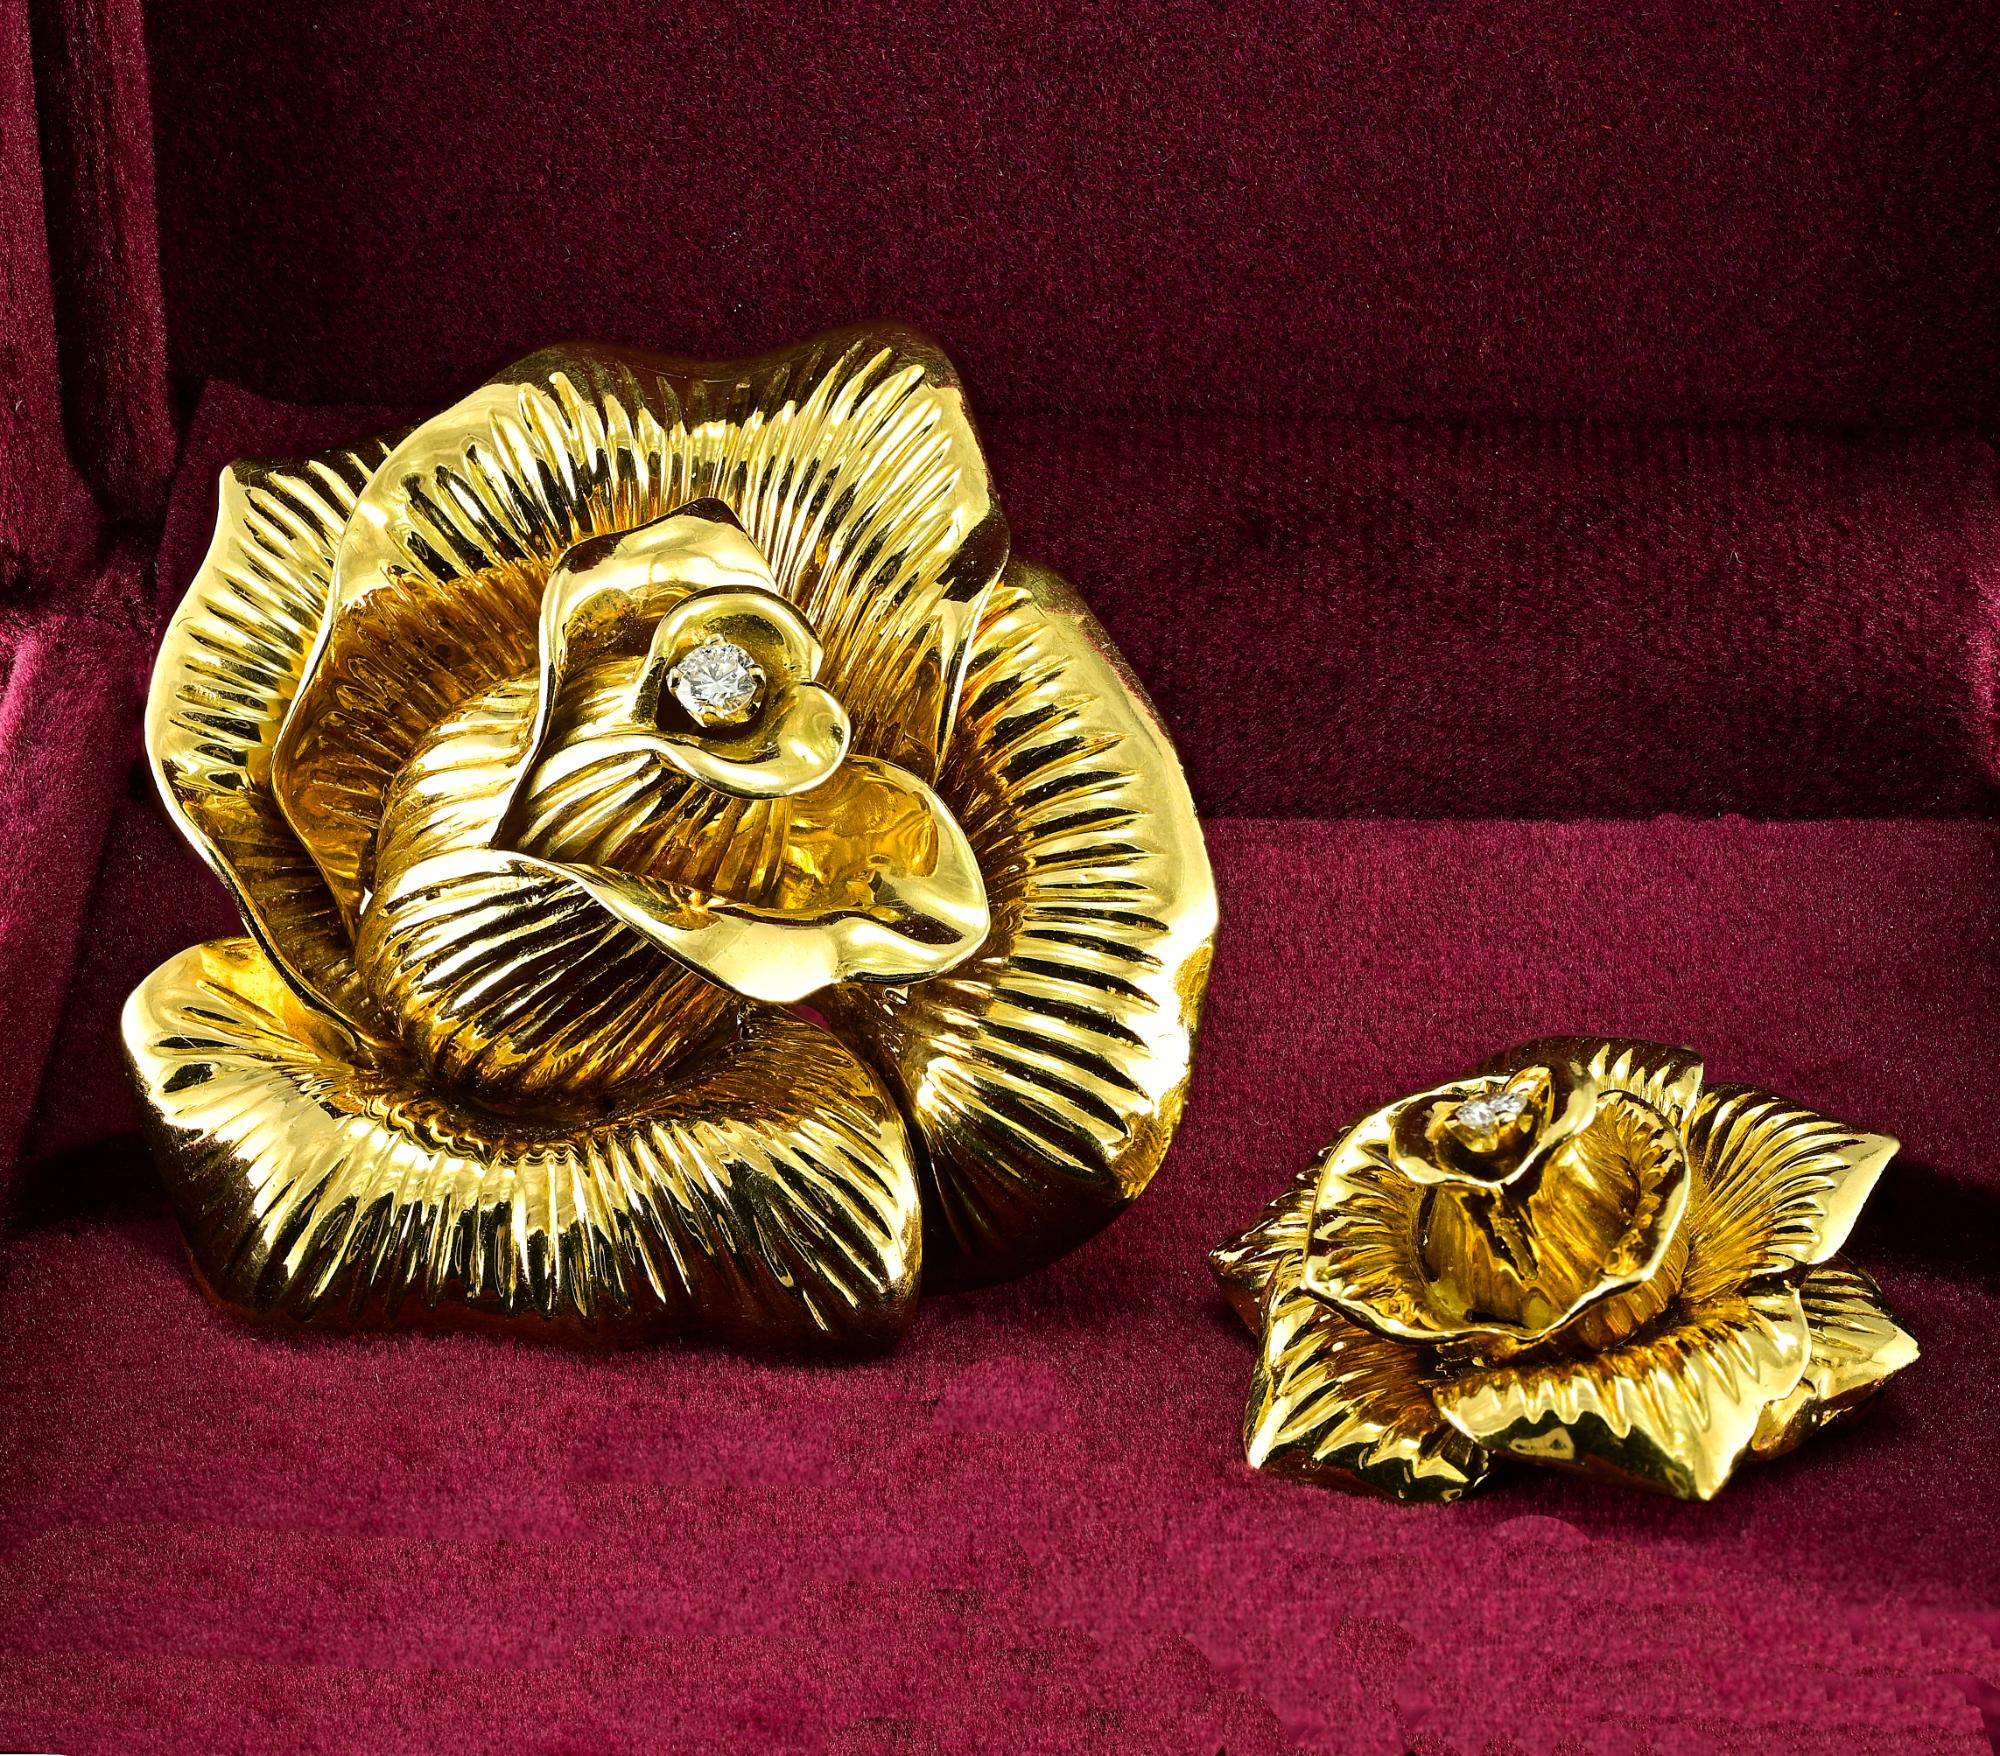 Chic and unique art made design and workmanship, rendered in the form of 3D Roses, one pretty large, the other is smaller, to wear together or separately
Centrally set with a white sparkly Diamond on each brooch - 2 brilliant cut diamonds totaling